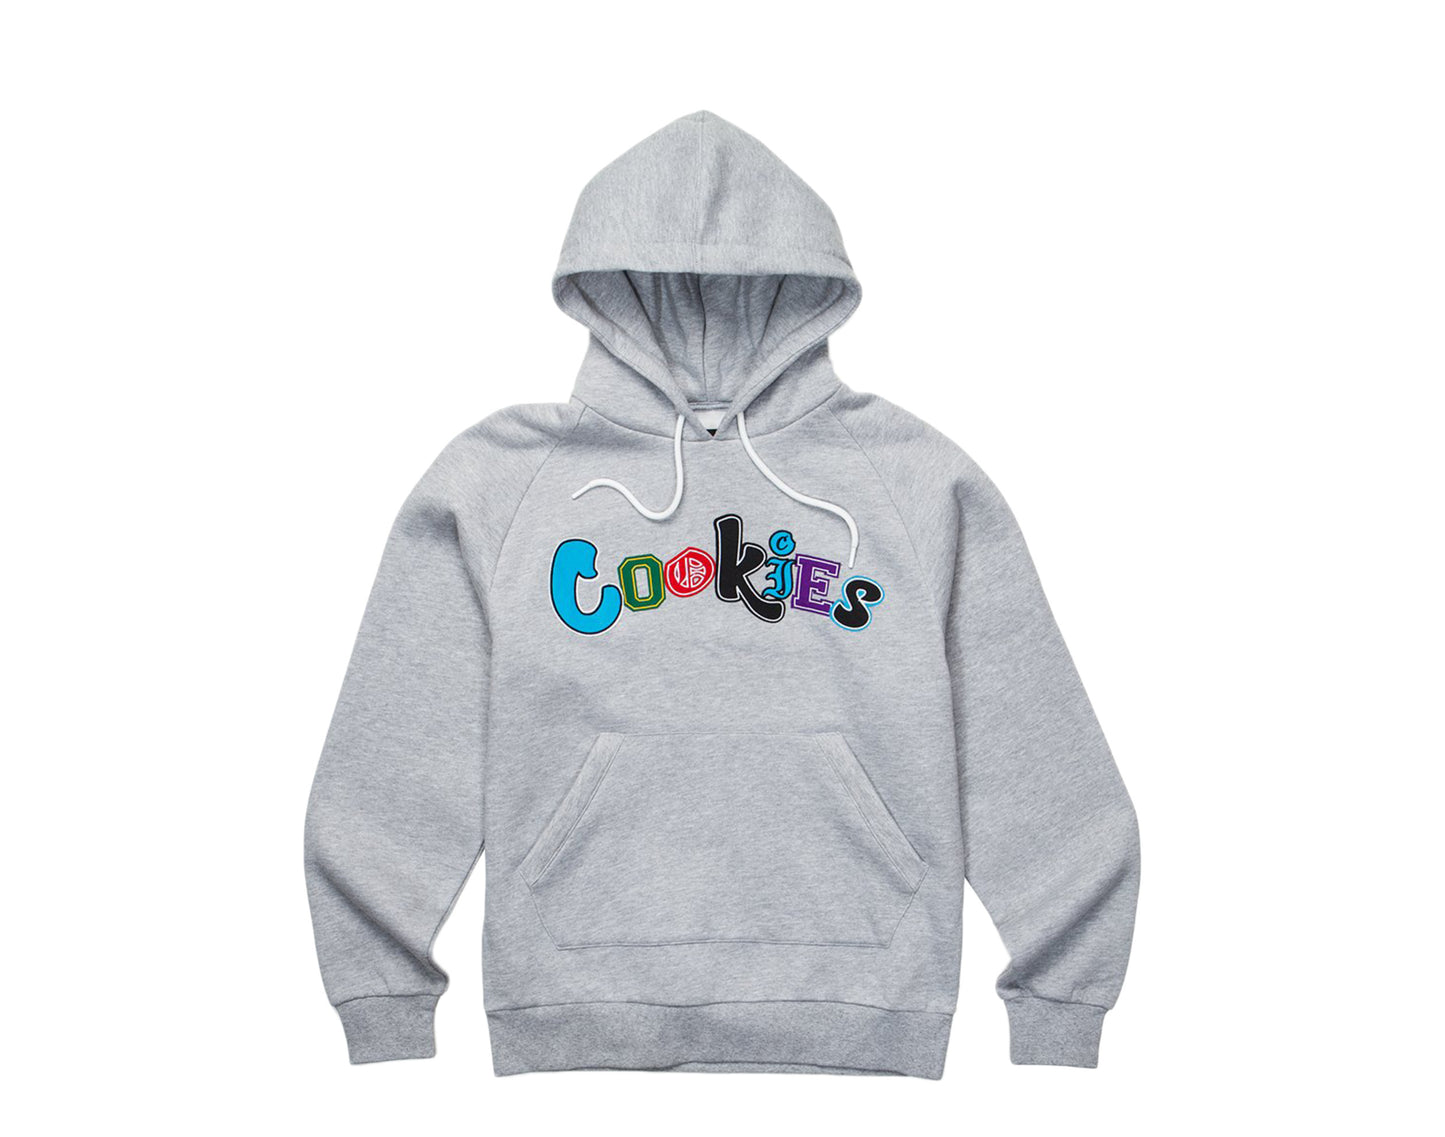 Cookies City Limits Fleece Pullover Printed Applique Grey Hoodie 1545H4109-HGY